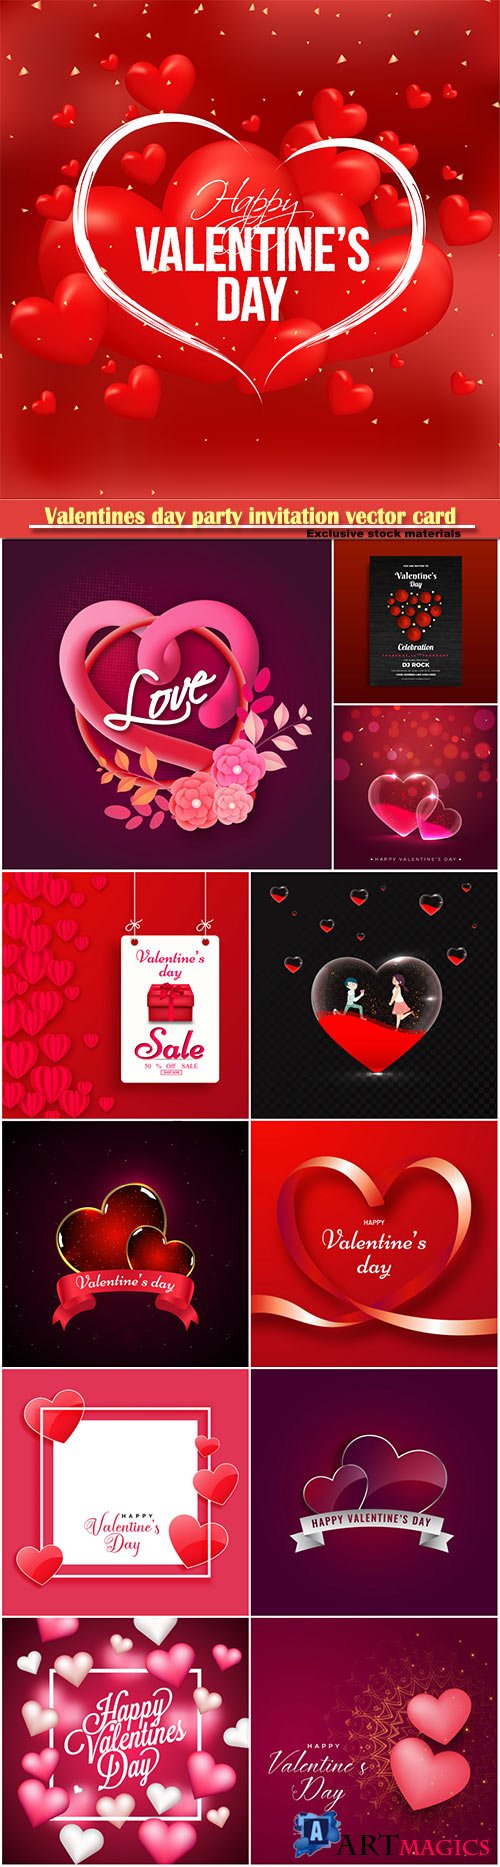 Valentines day party invitation vector card # 22